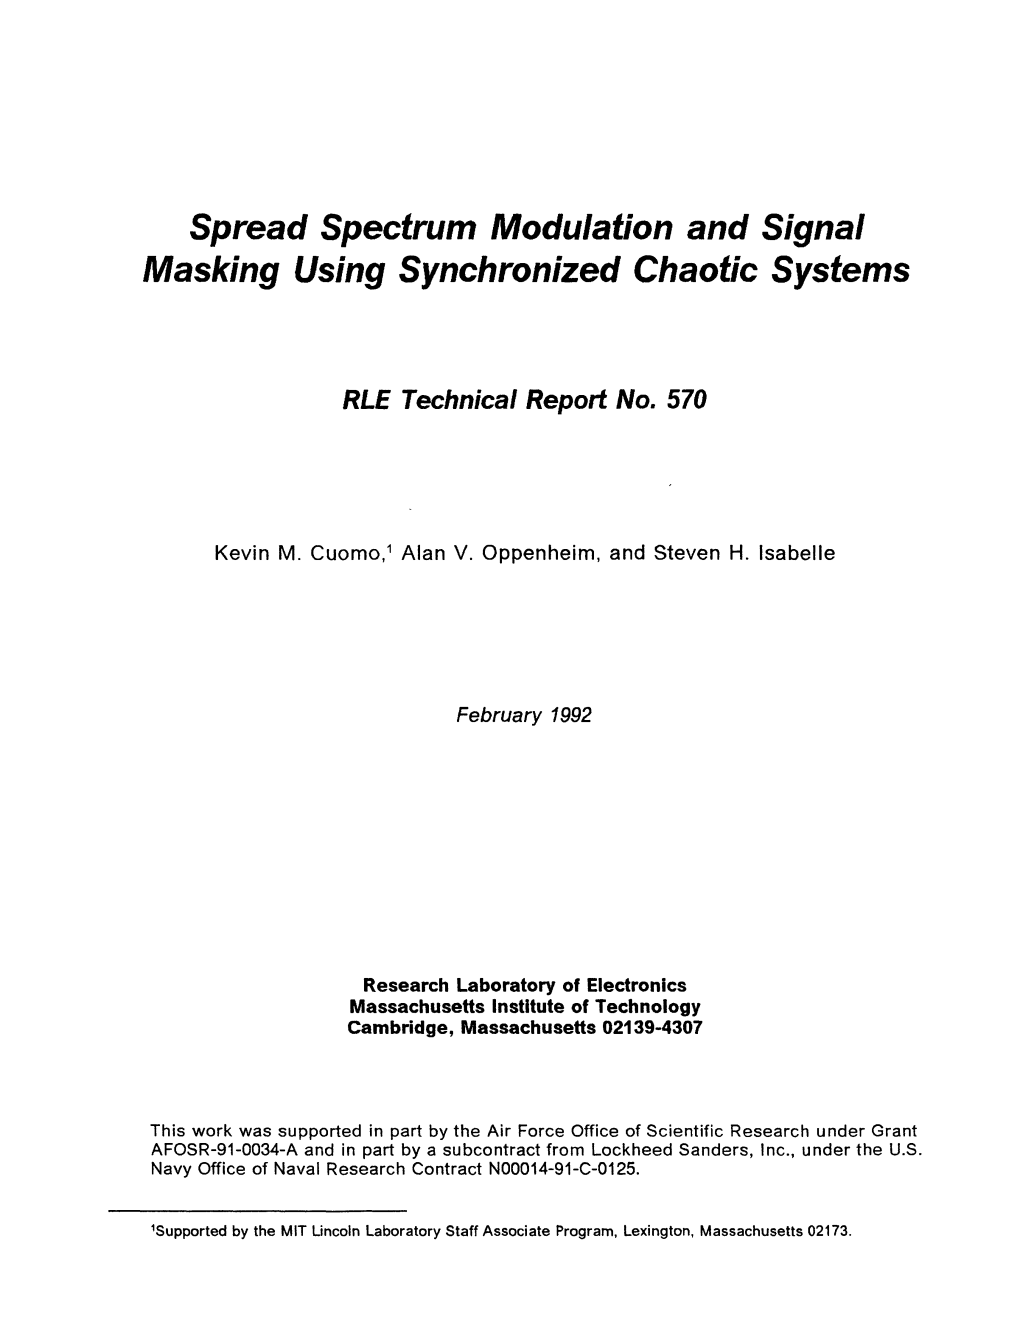 Spread Spectrum Modulation and Signal Masking Using Synchronized Chaotic Systems